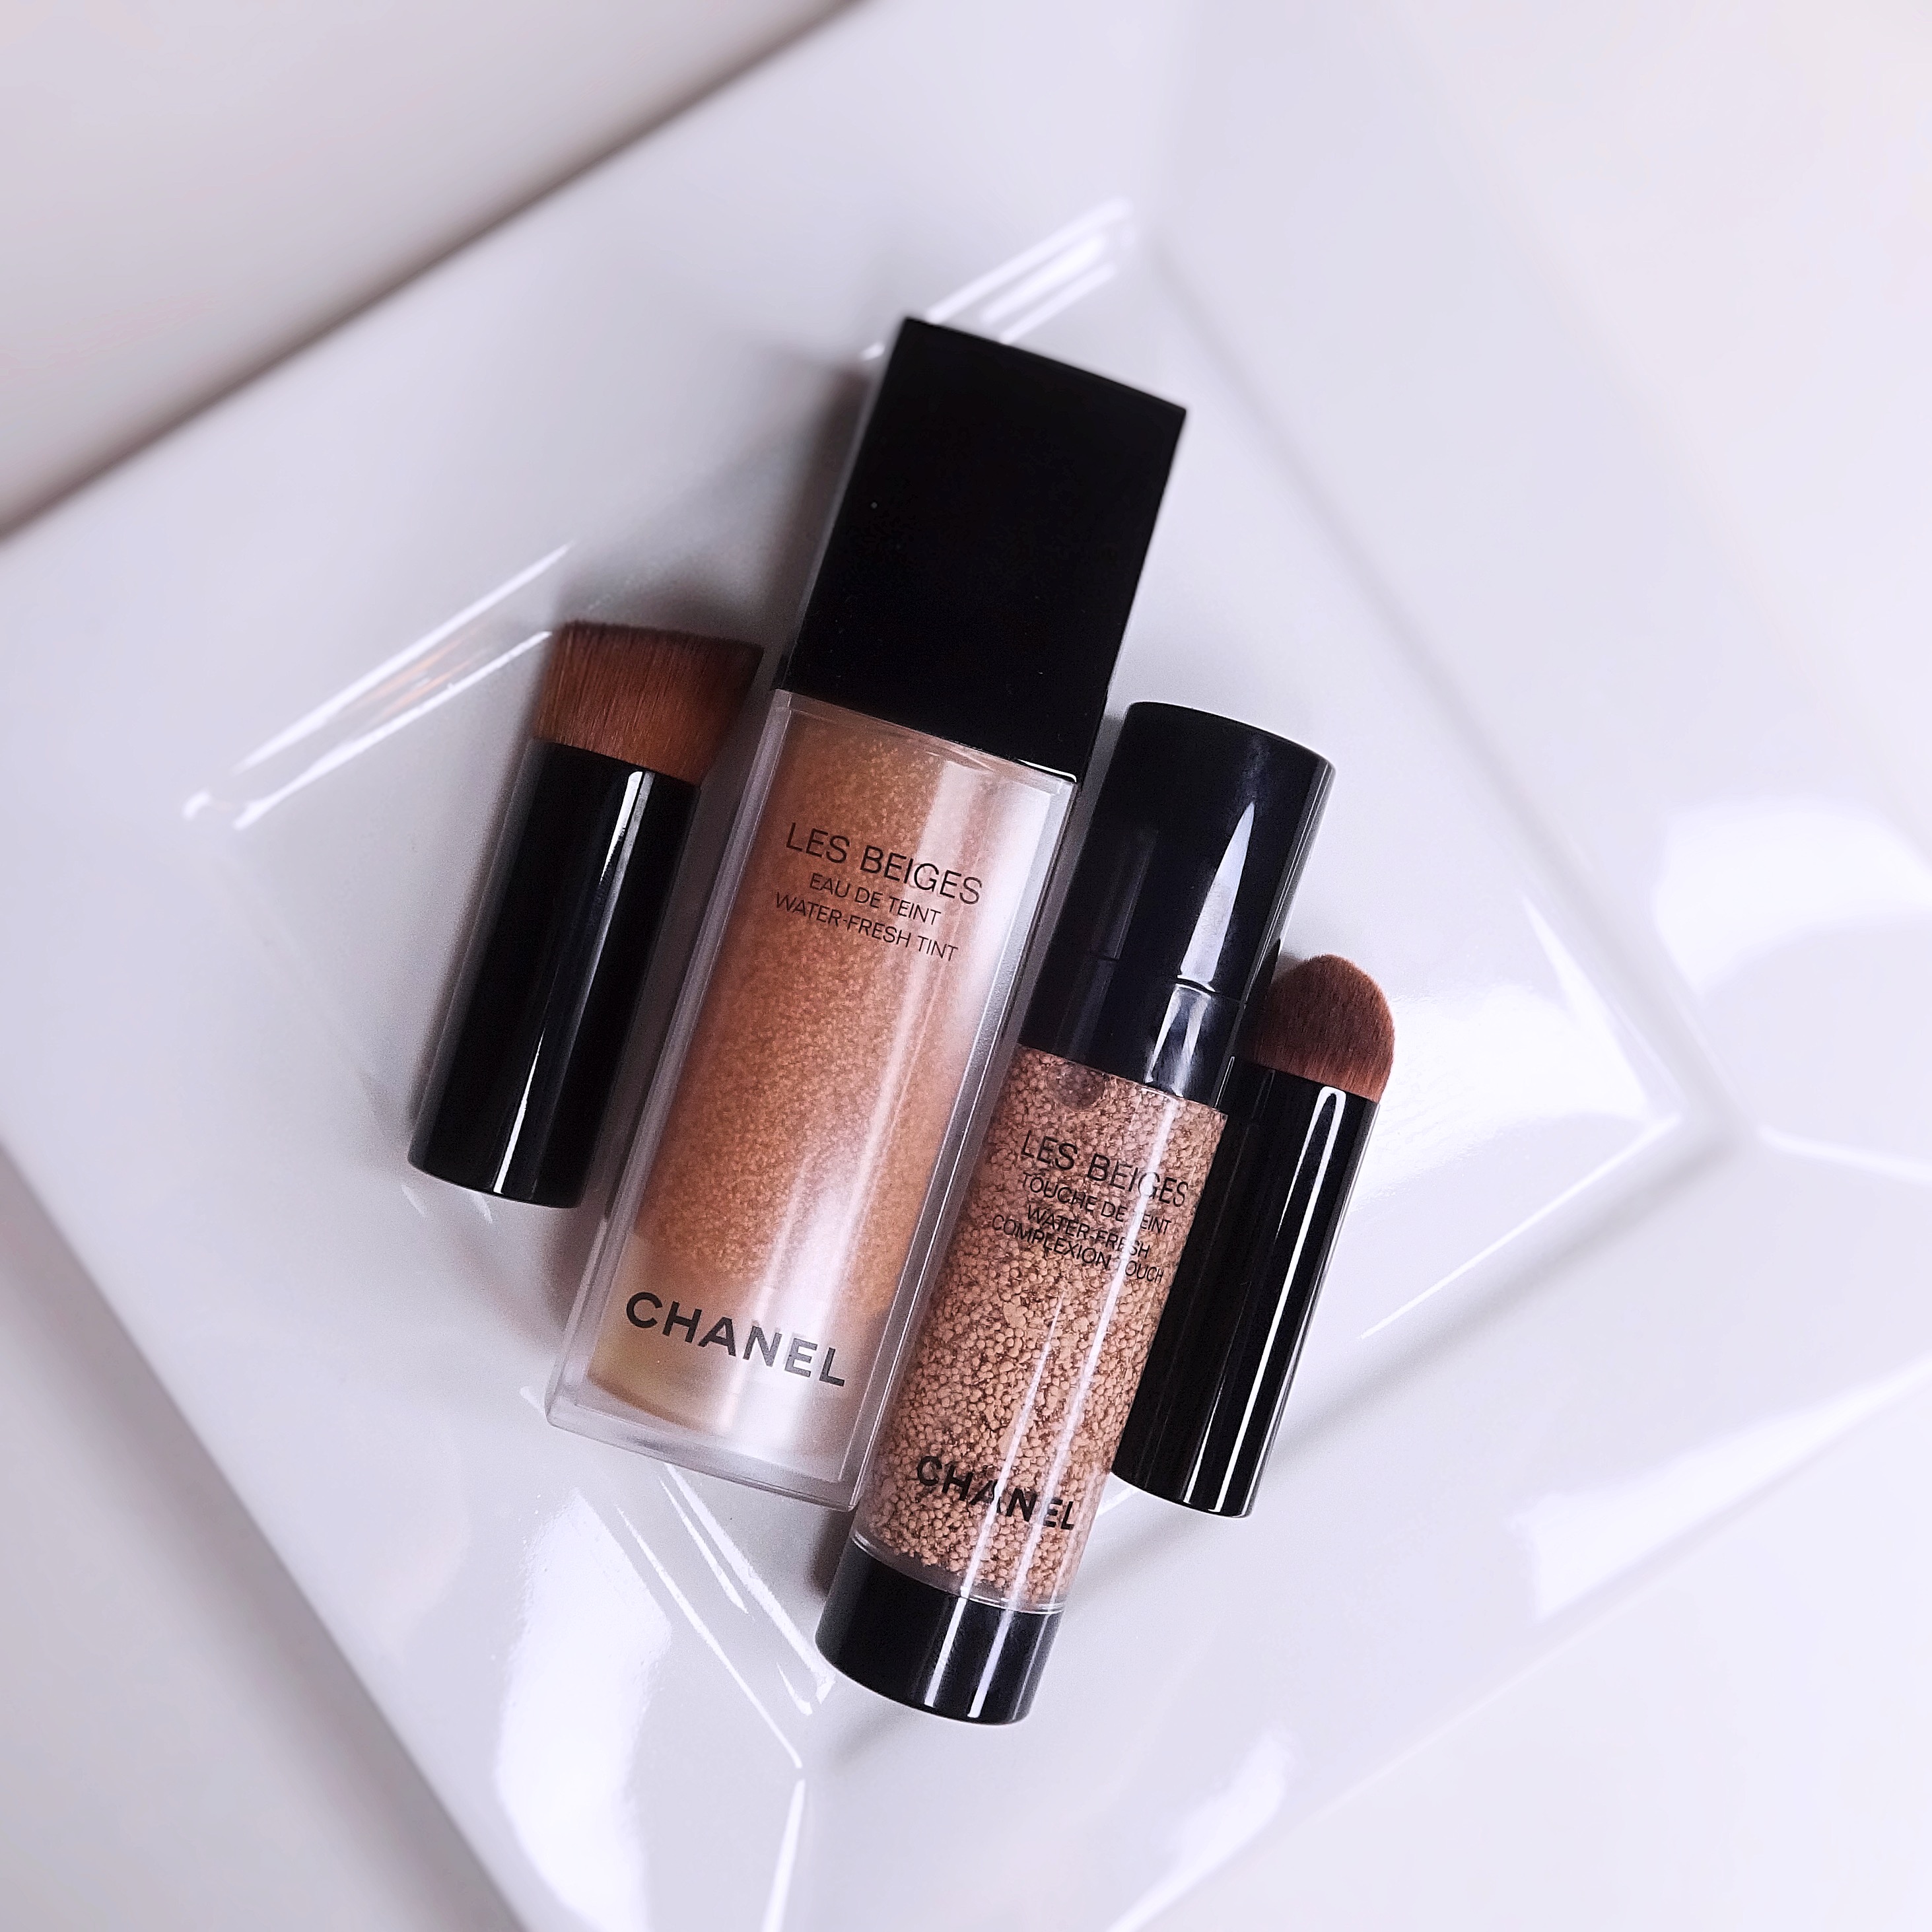 Chanel Les Beiges Water Tint Review! 12 Days of Foundation Day 11 